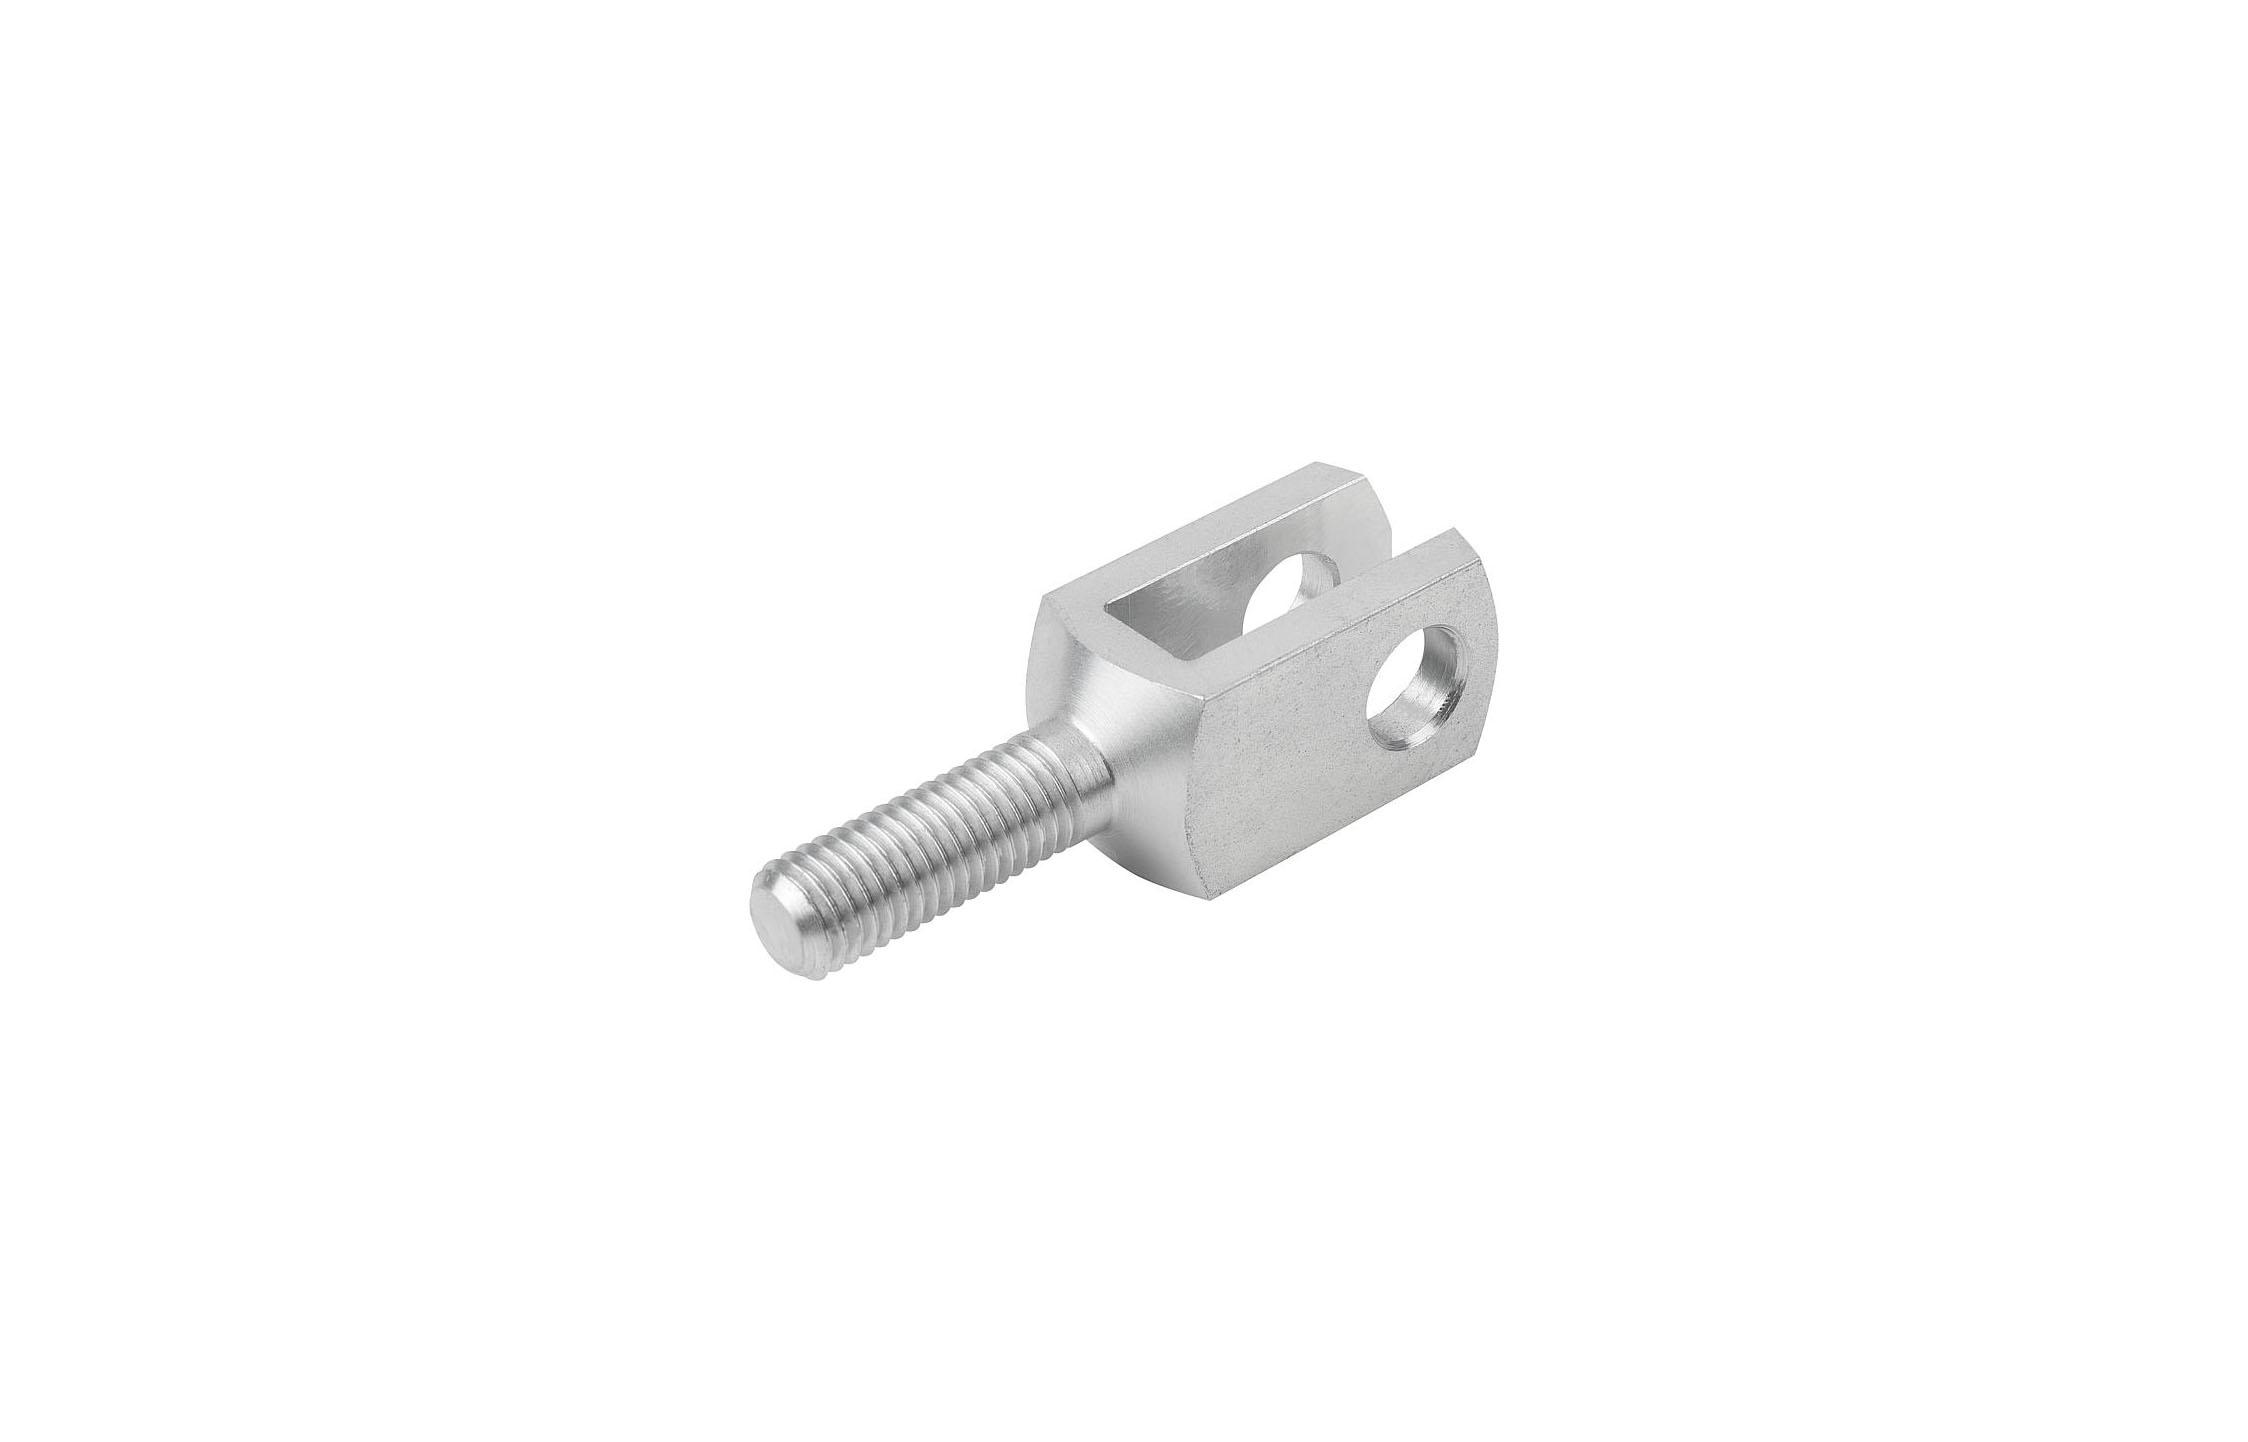 K1459_Clevis, steel or stainless steel with male thread